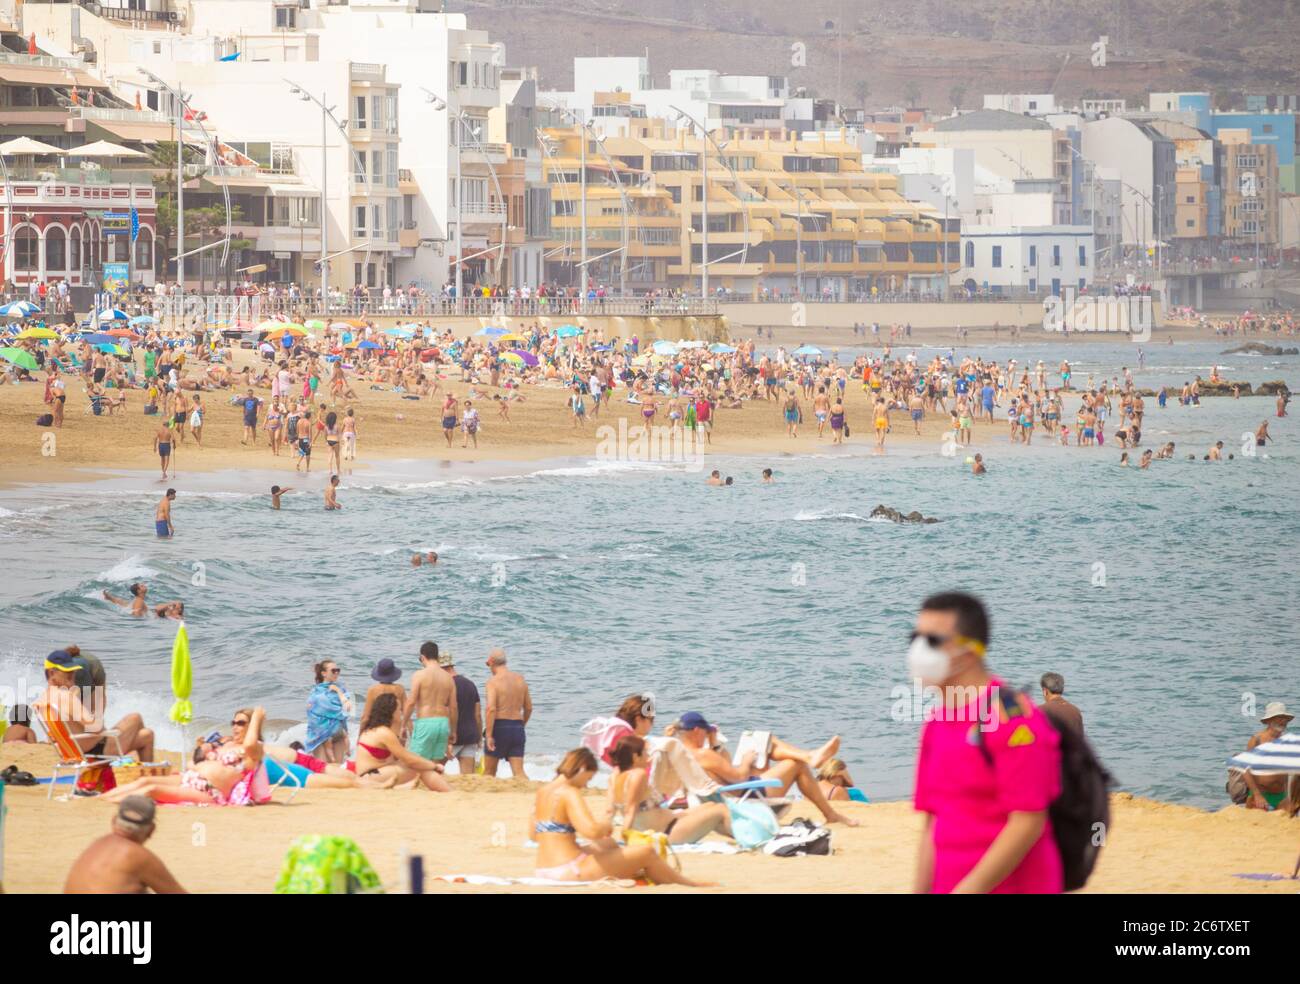 Las Palmas, Gran Canaria, Canary Islands, Spain. 12th July, 2020. Loclas  and the odd tourist making the most of an almost tourist free city beach in  Las Palmas on Gran Canaria on